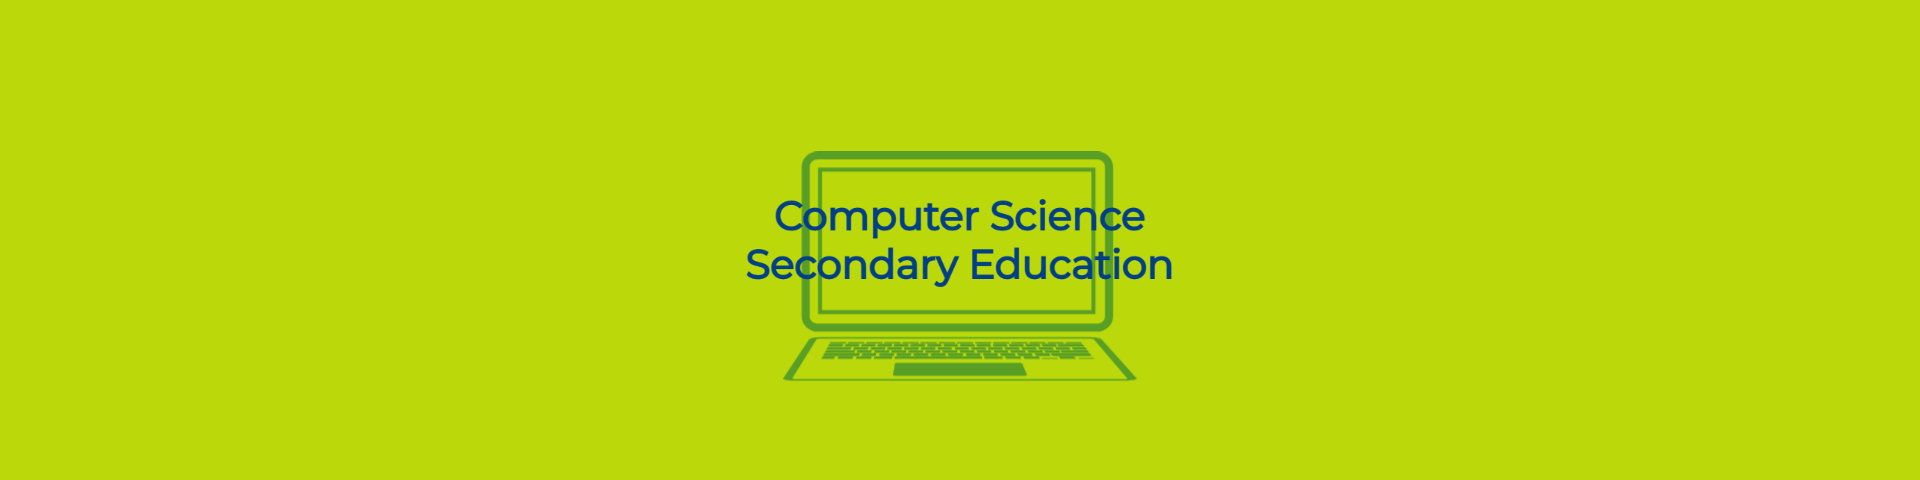 The image of a computer screen with overlaid text that reads "Computer Science Secondary Education"